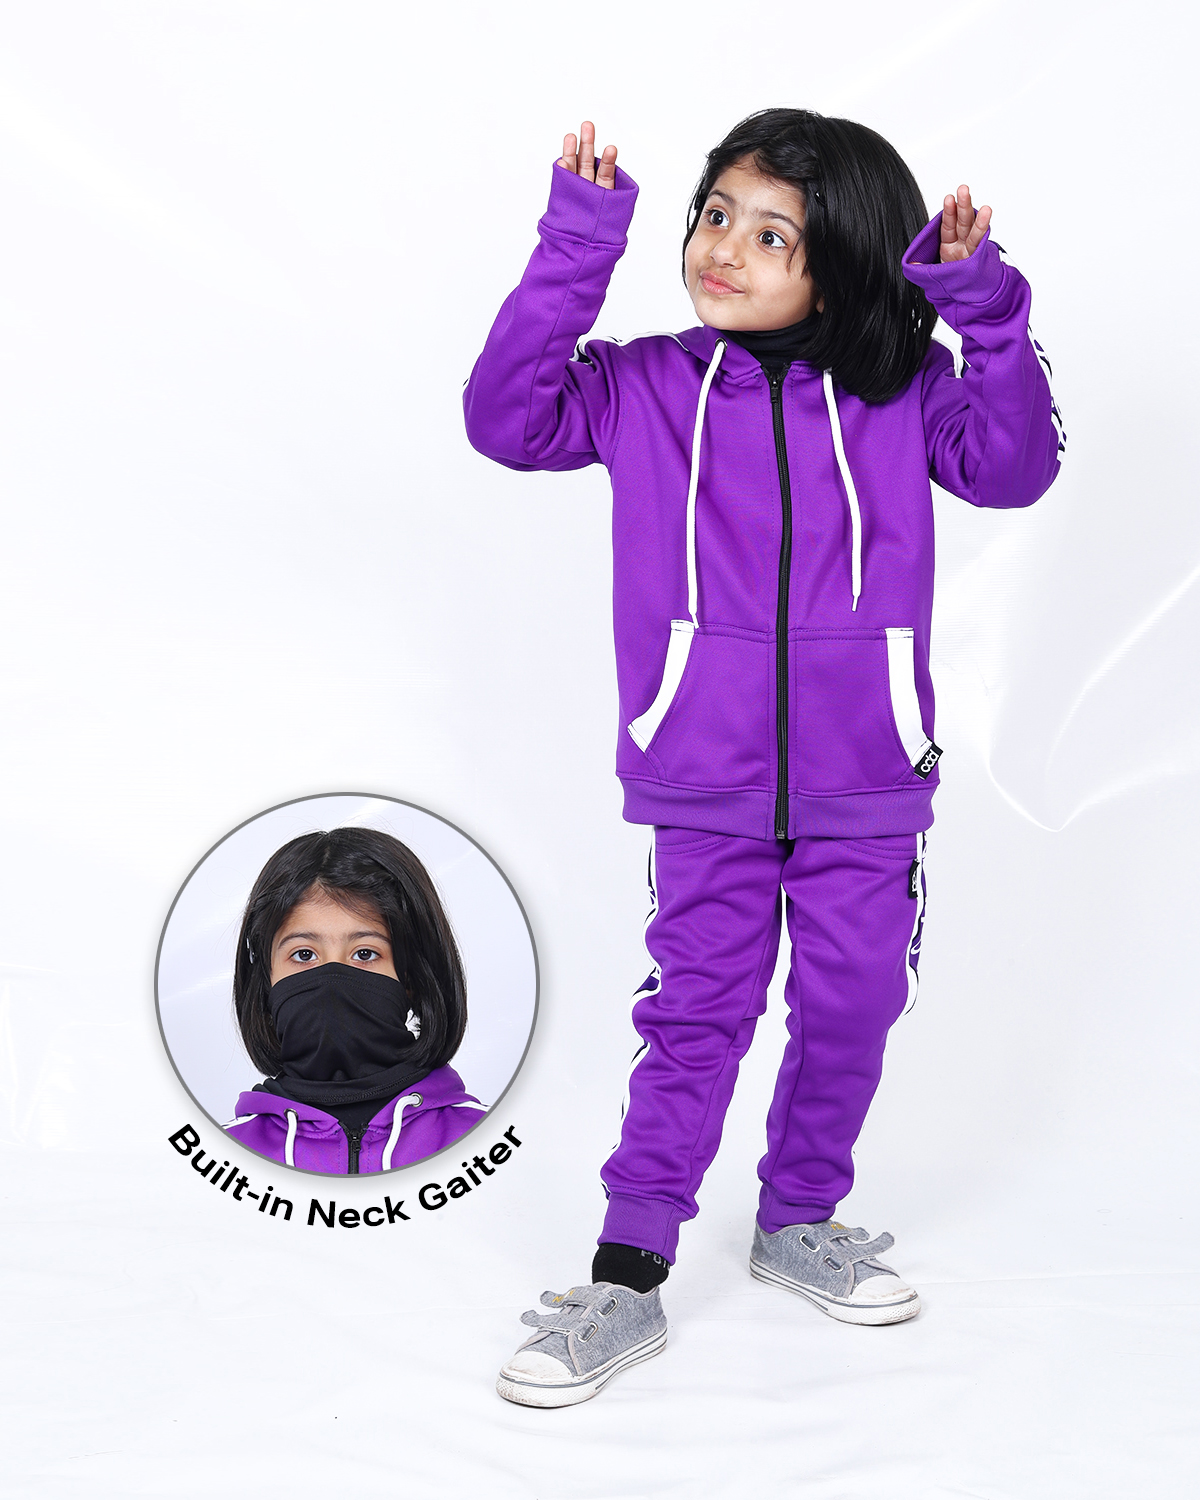 Buy Online Premium Quality Hoodie Set with Neck Gaiter for Kids - Purple  Color